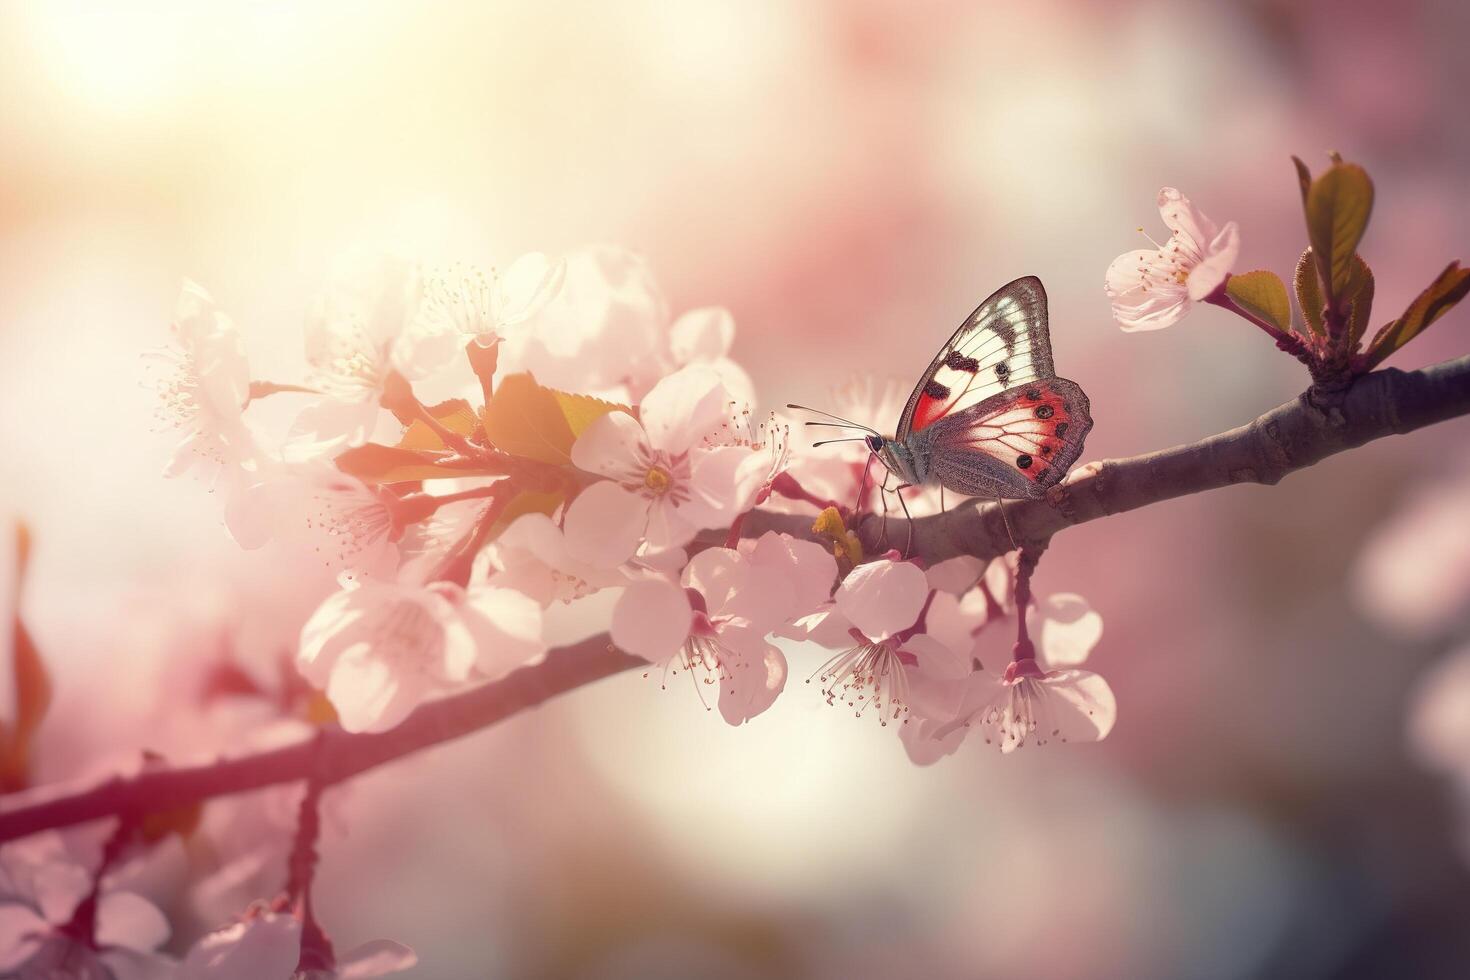 Spring banner, branches of blossoming cherry against the background of blue sky, and butterflies on nature outdoors. Pink sakura flowers, dreamy romantic image spring, landscape, photo